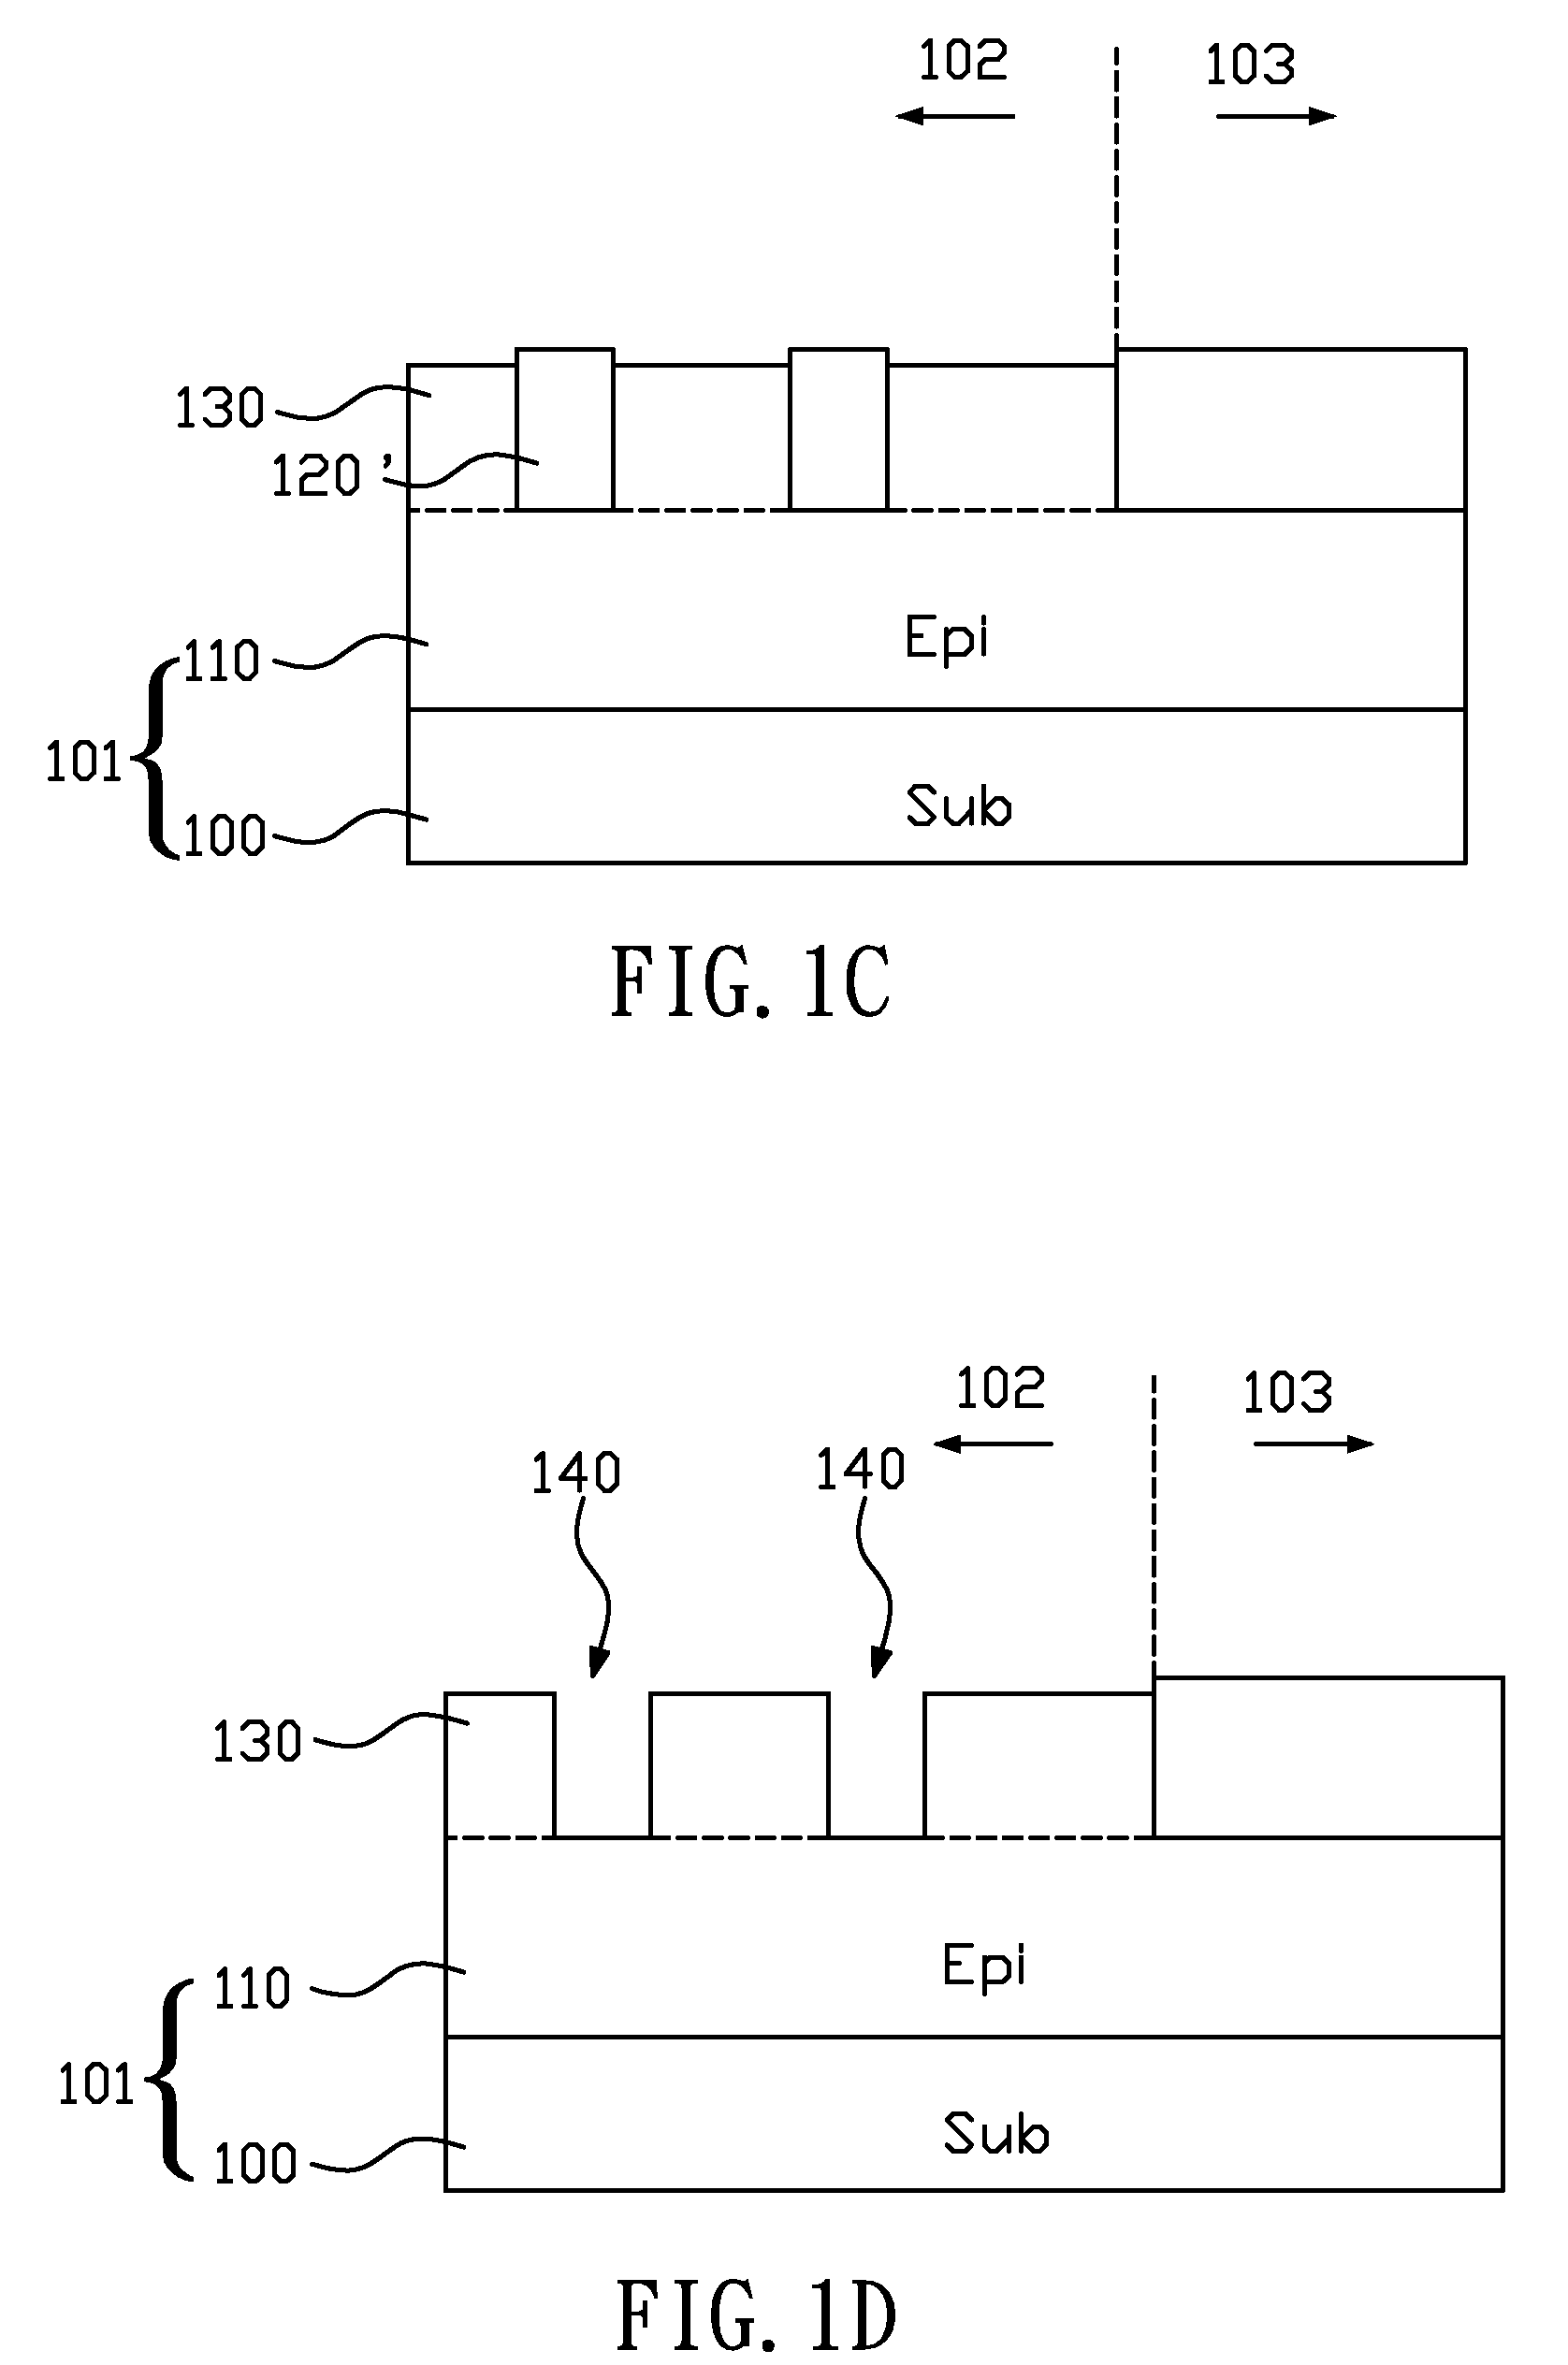 Method of manufacturing the trench power semiconductor structure